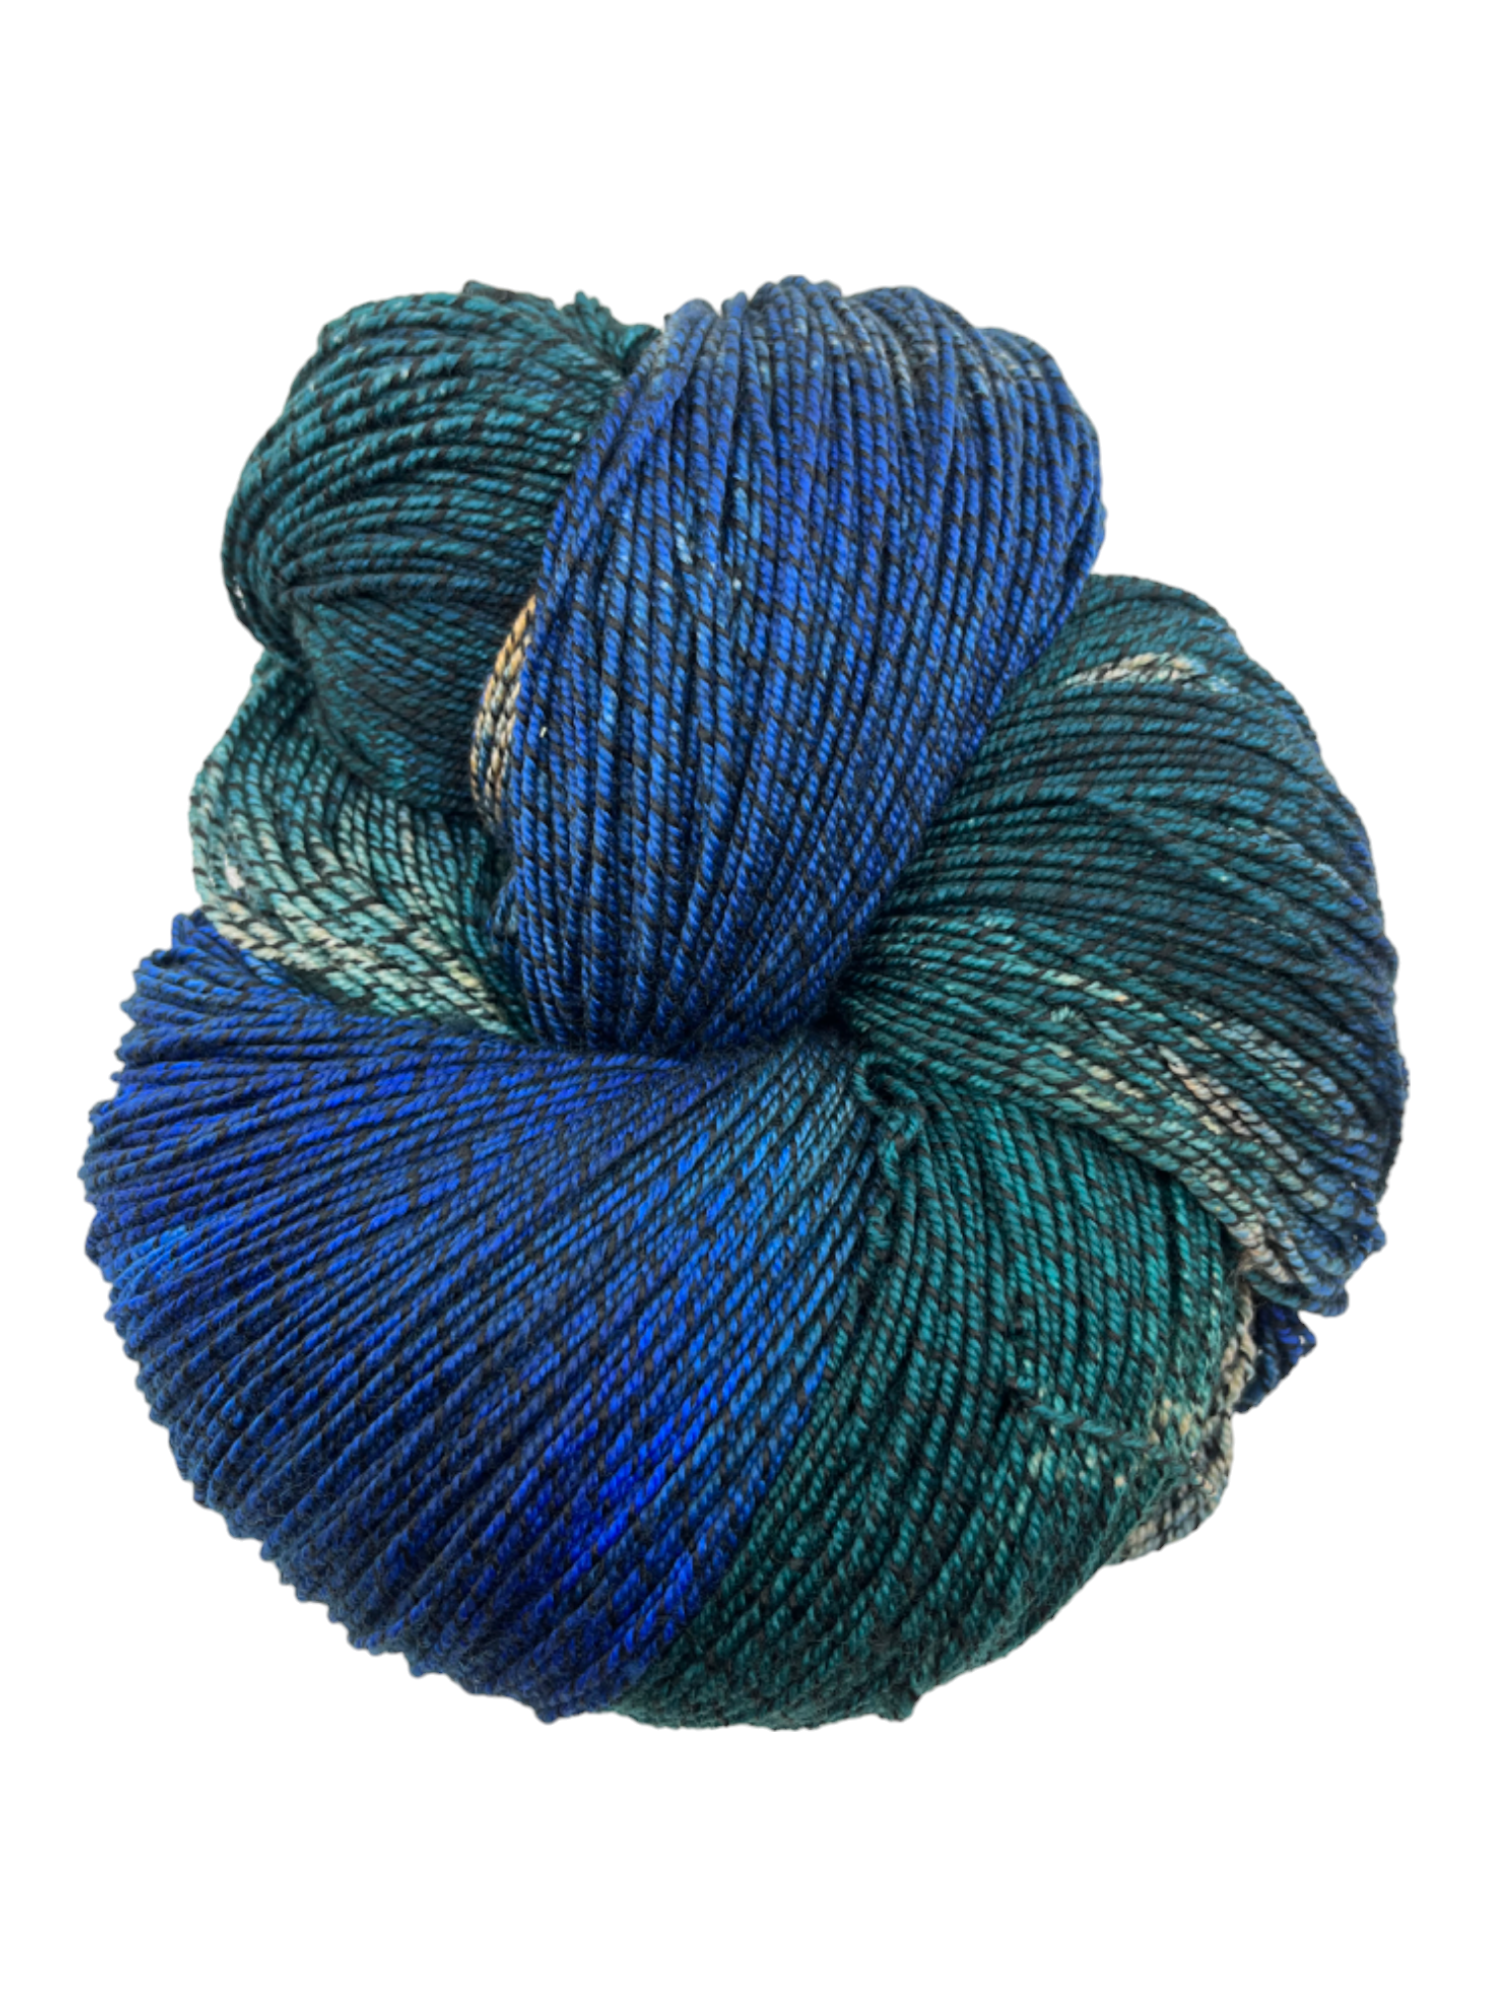 Nightshade Worsted Queen Size 37